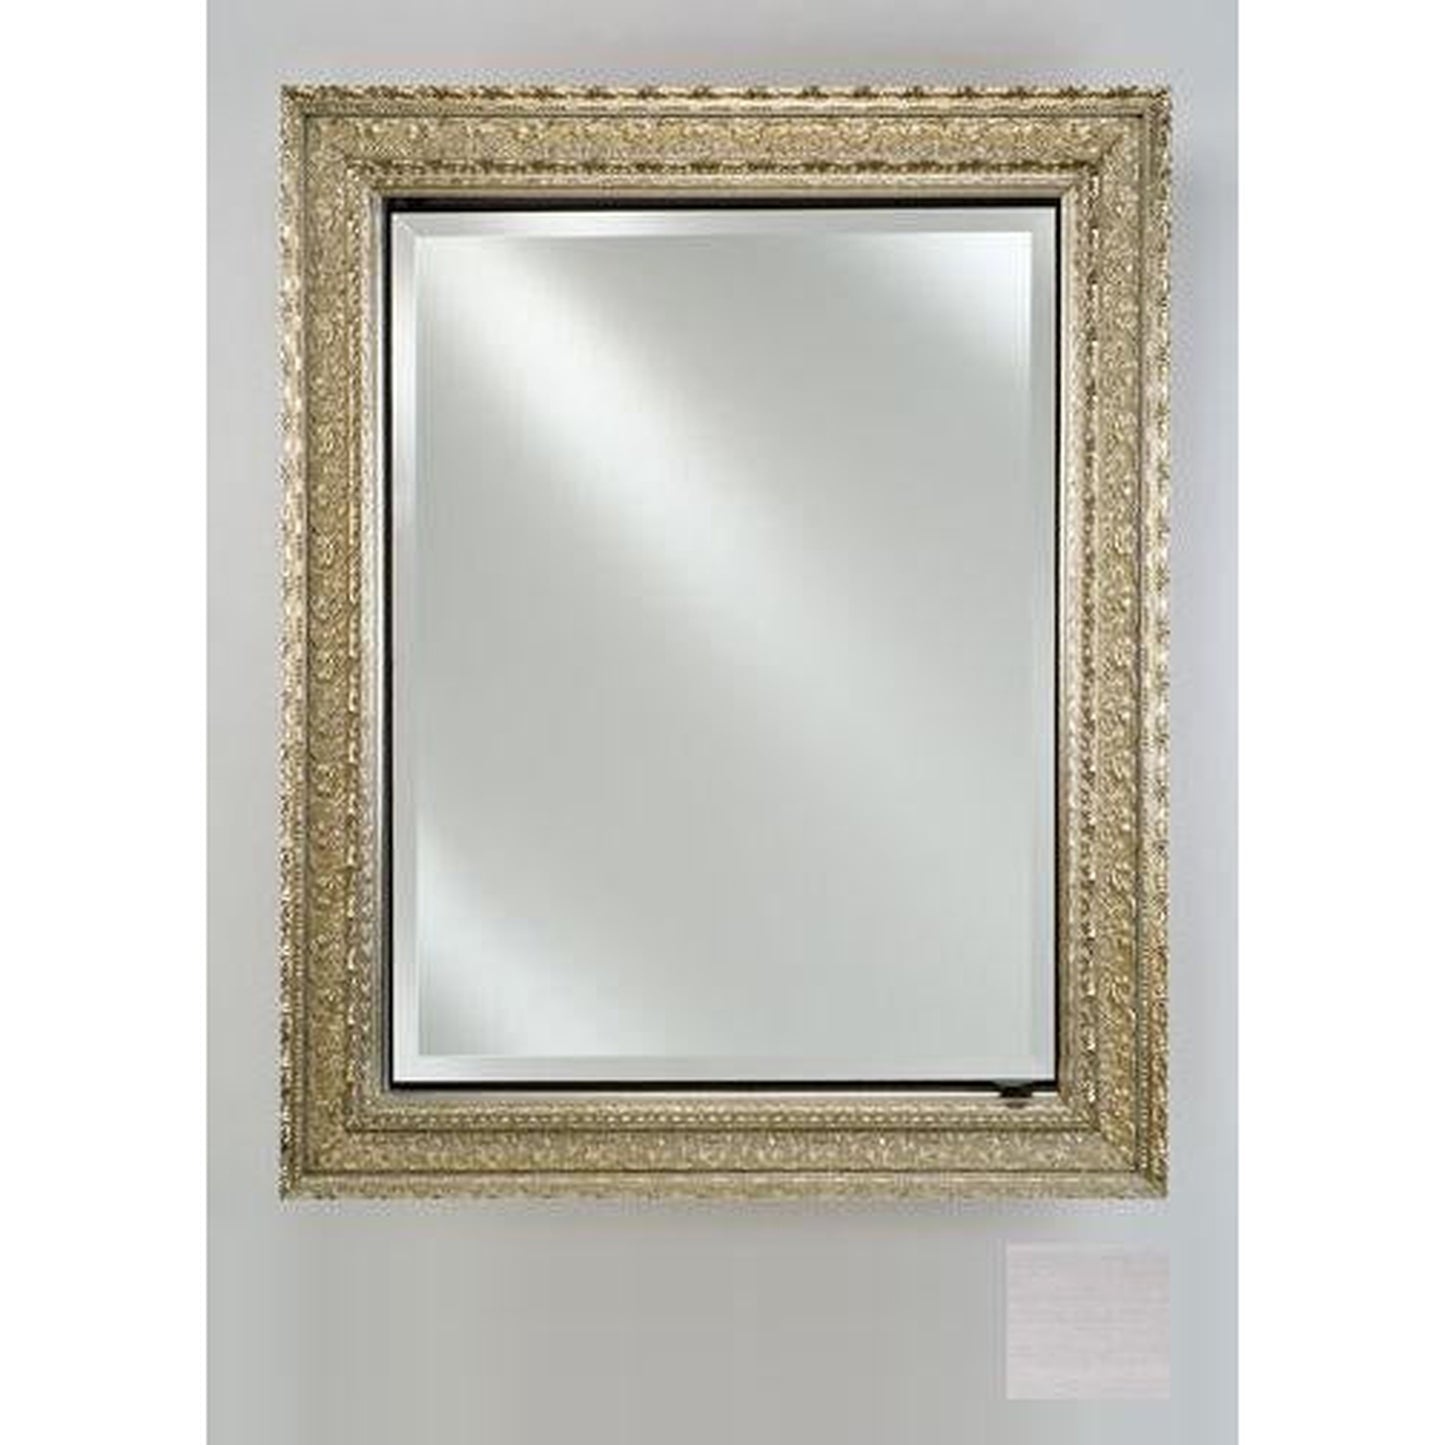 Afina Signature 20" x 30" Soho Stainless Recessed Reversible Hinged Single Door Medicine Cabinet With Beveled Edge Mirror